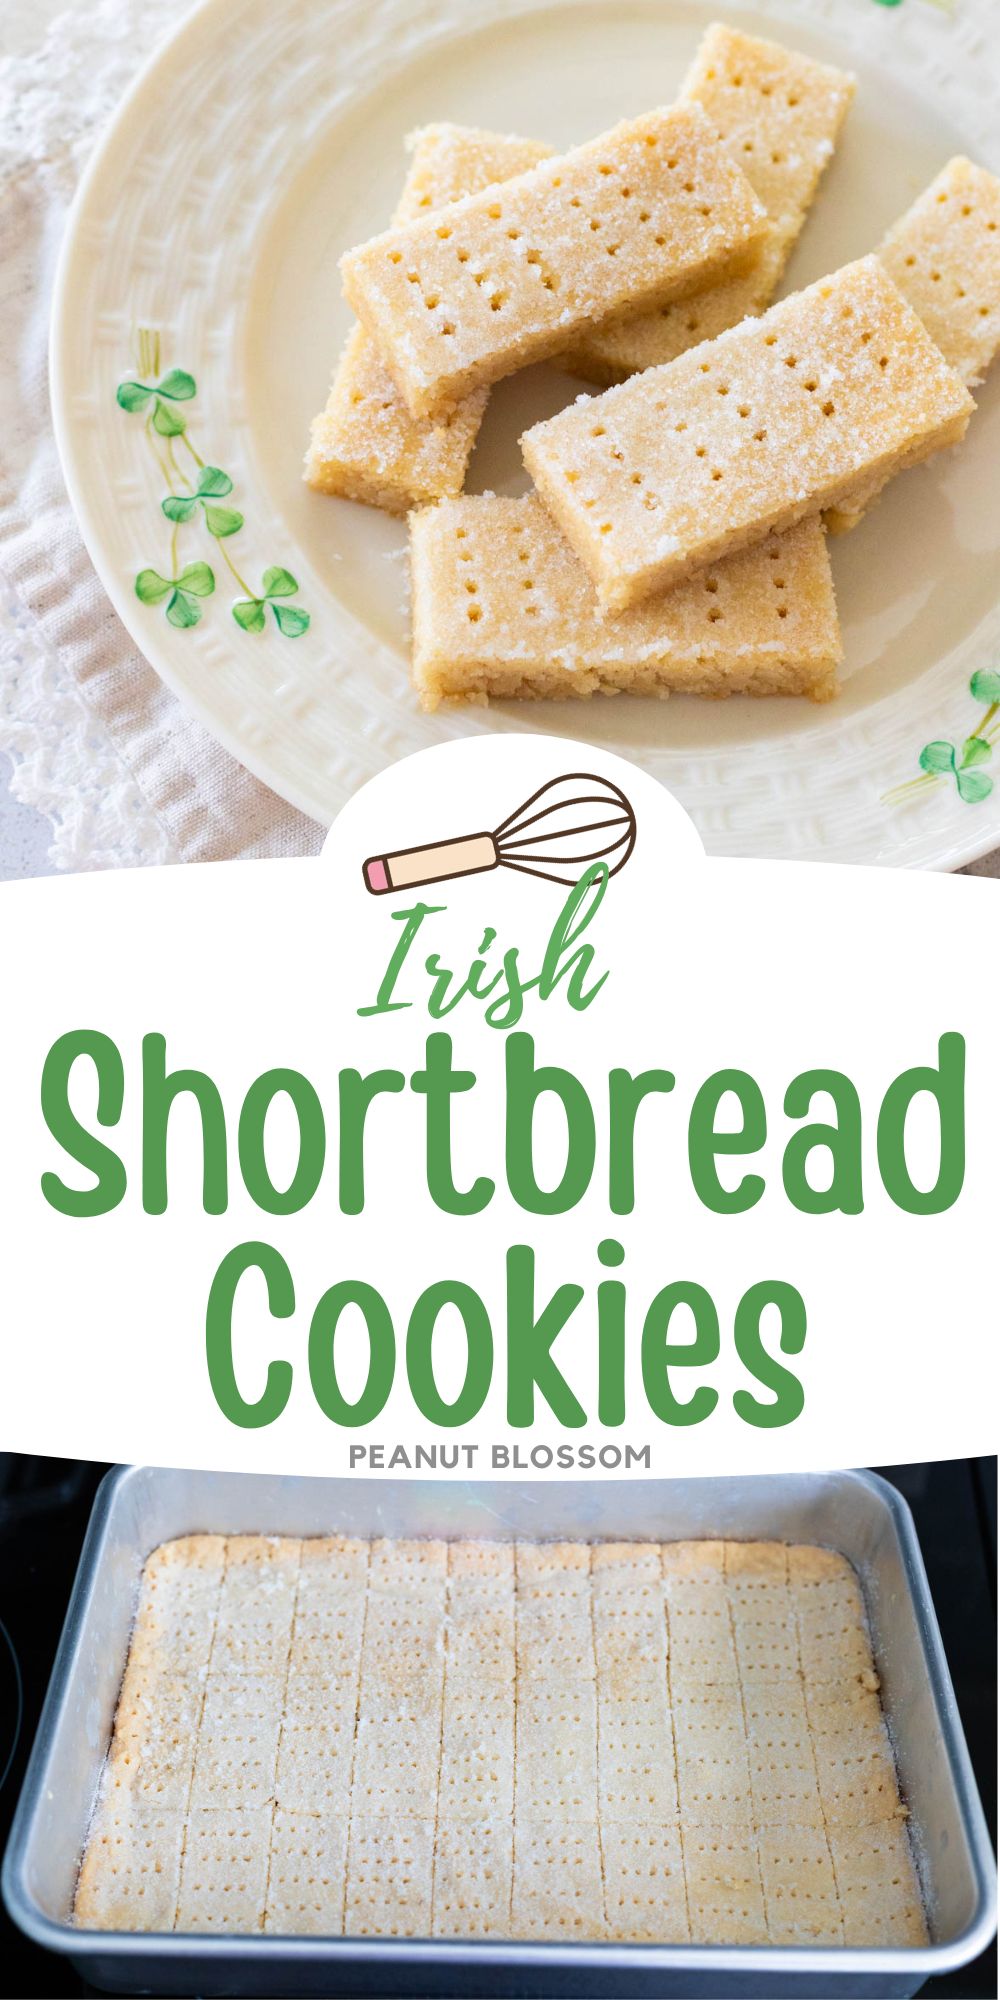 The photo collage shows a shamrock plate of shortbread cookies next to a photo of the shortbread in a baking pan fresh from the oven.